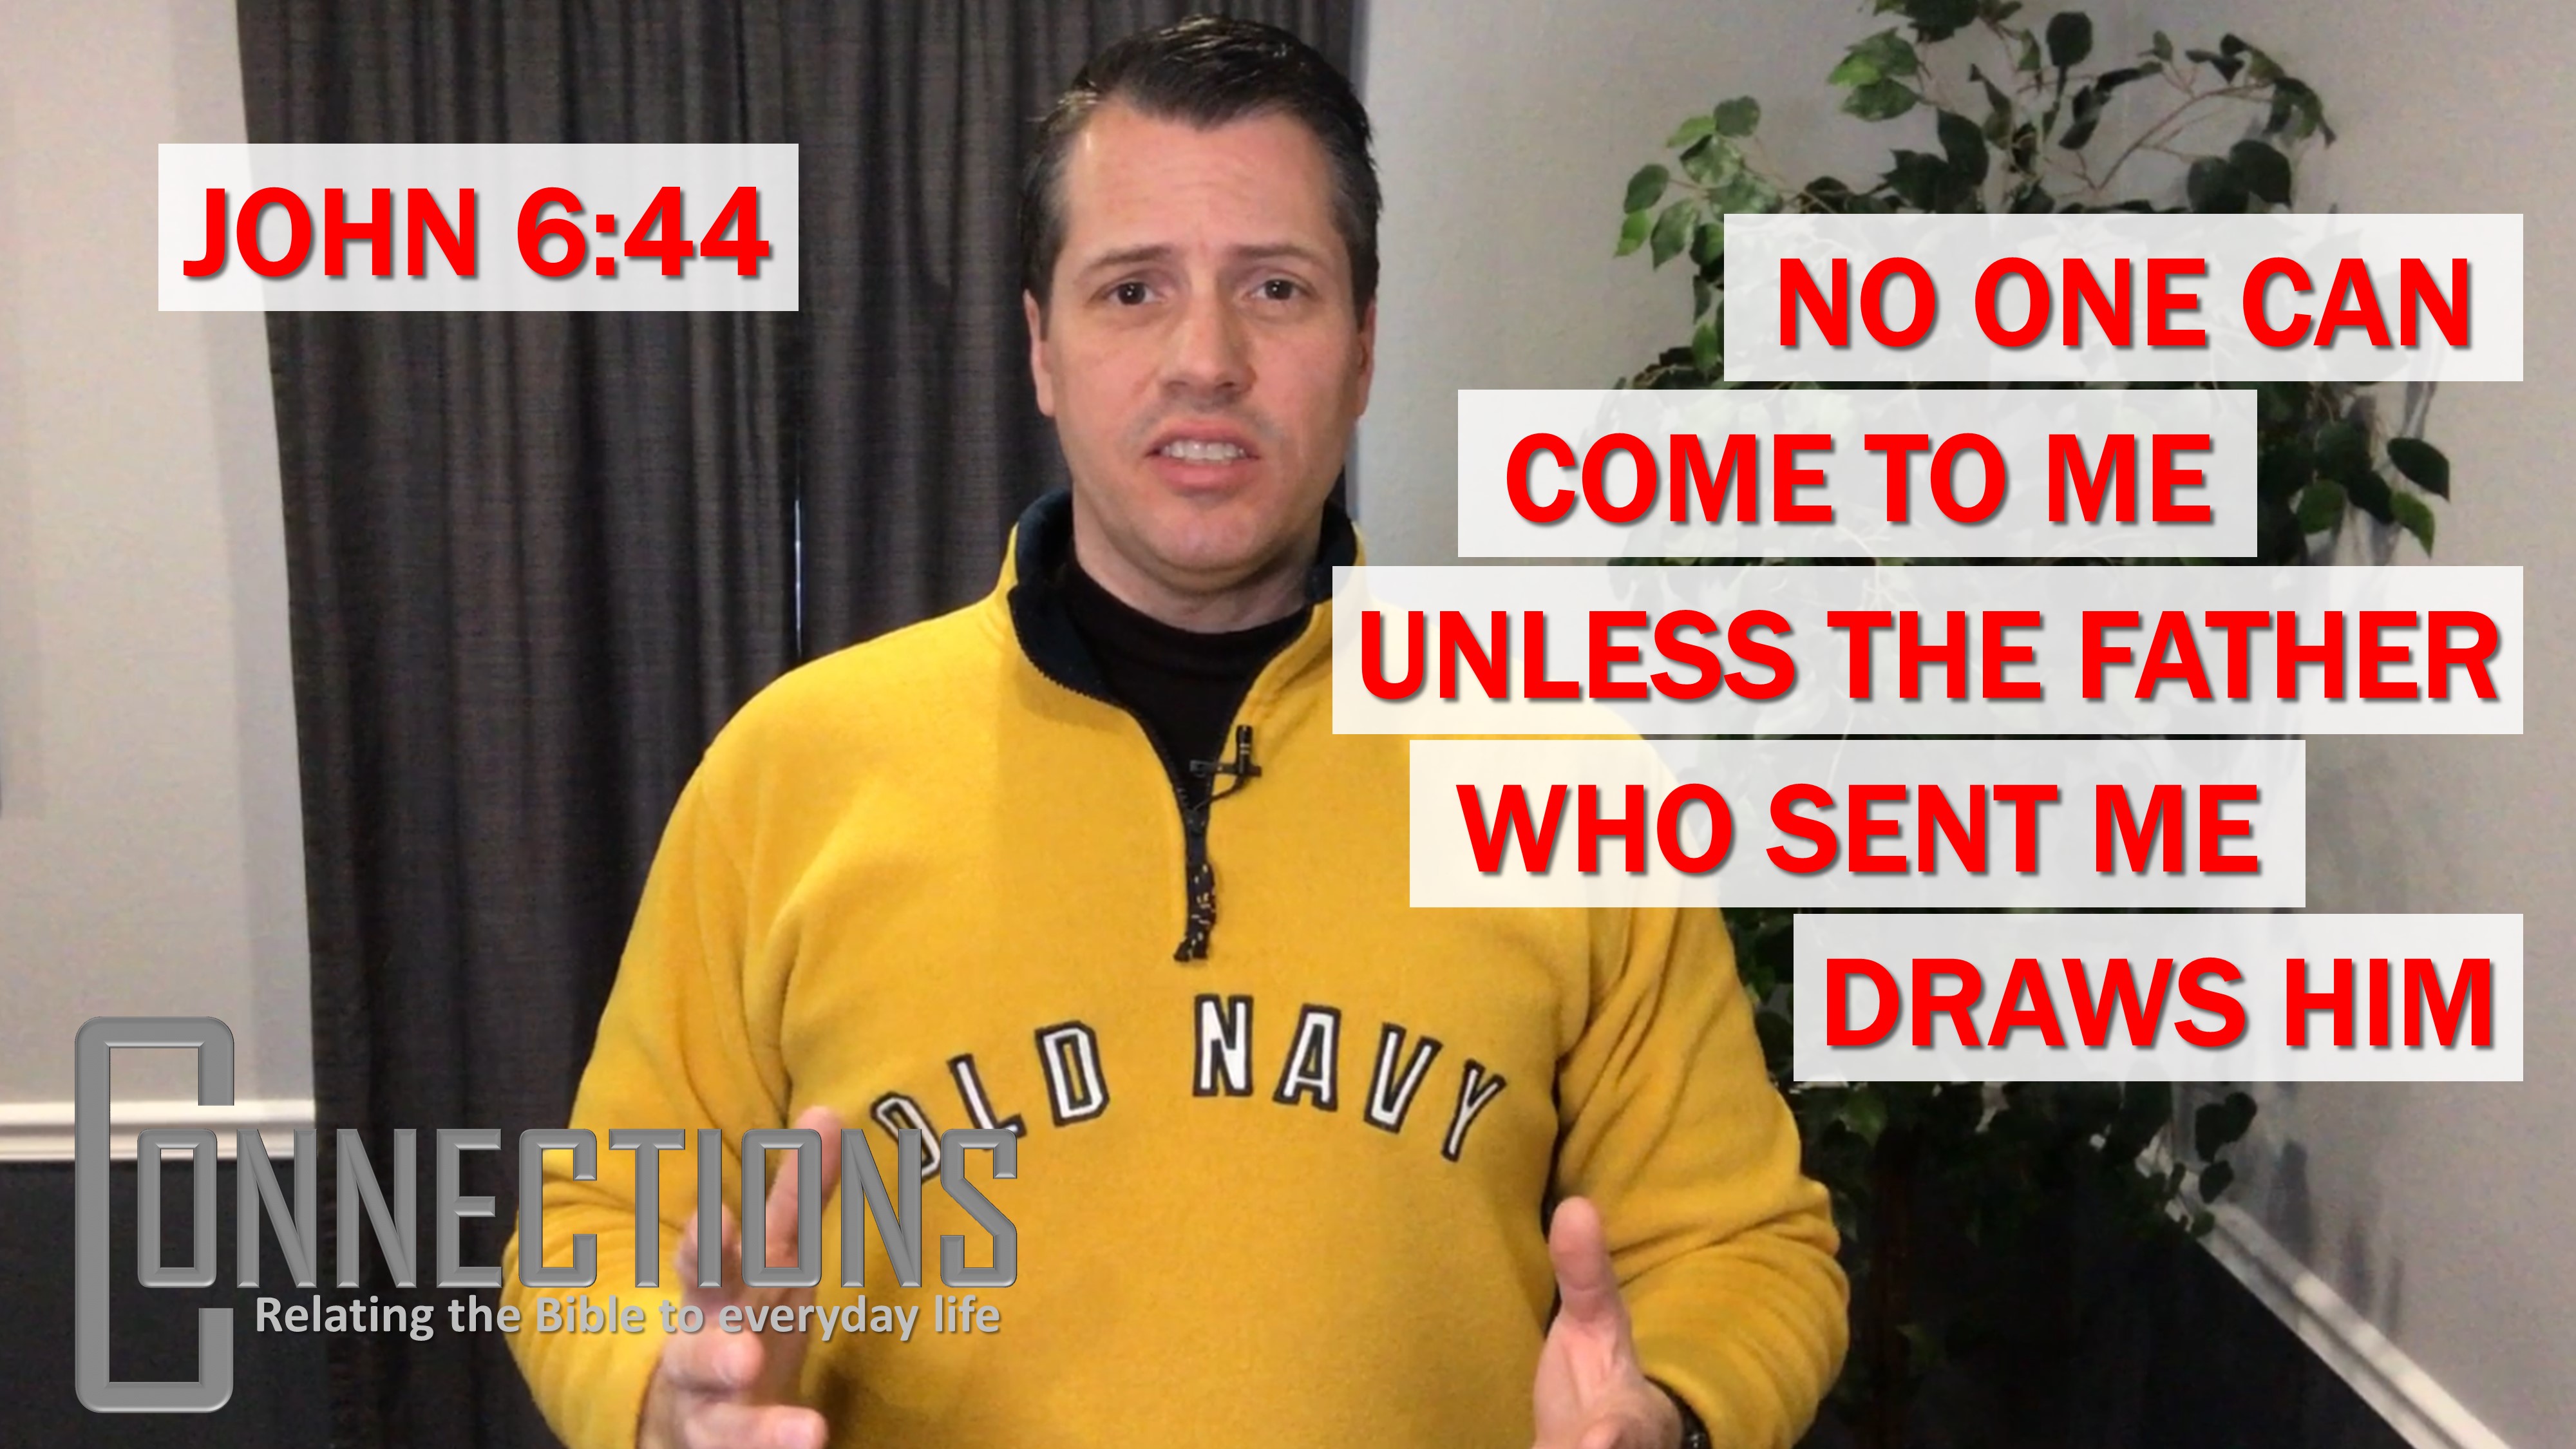 John 8:44 – No One Can Come to Me Unless the Father Draws Him